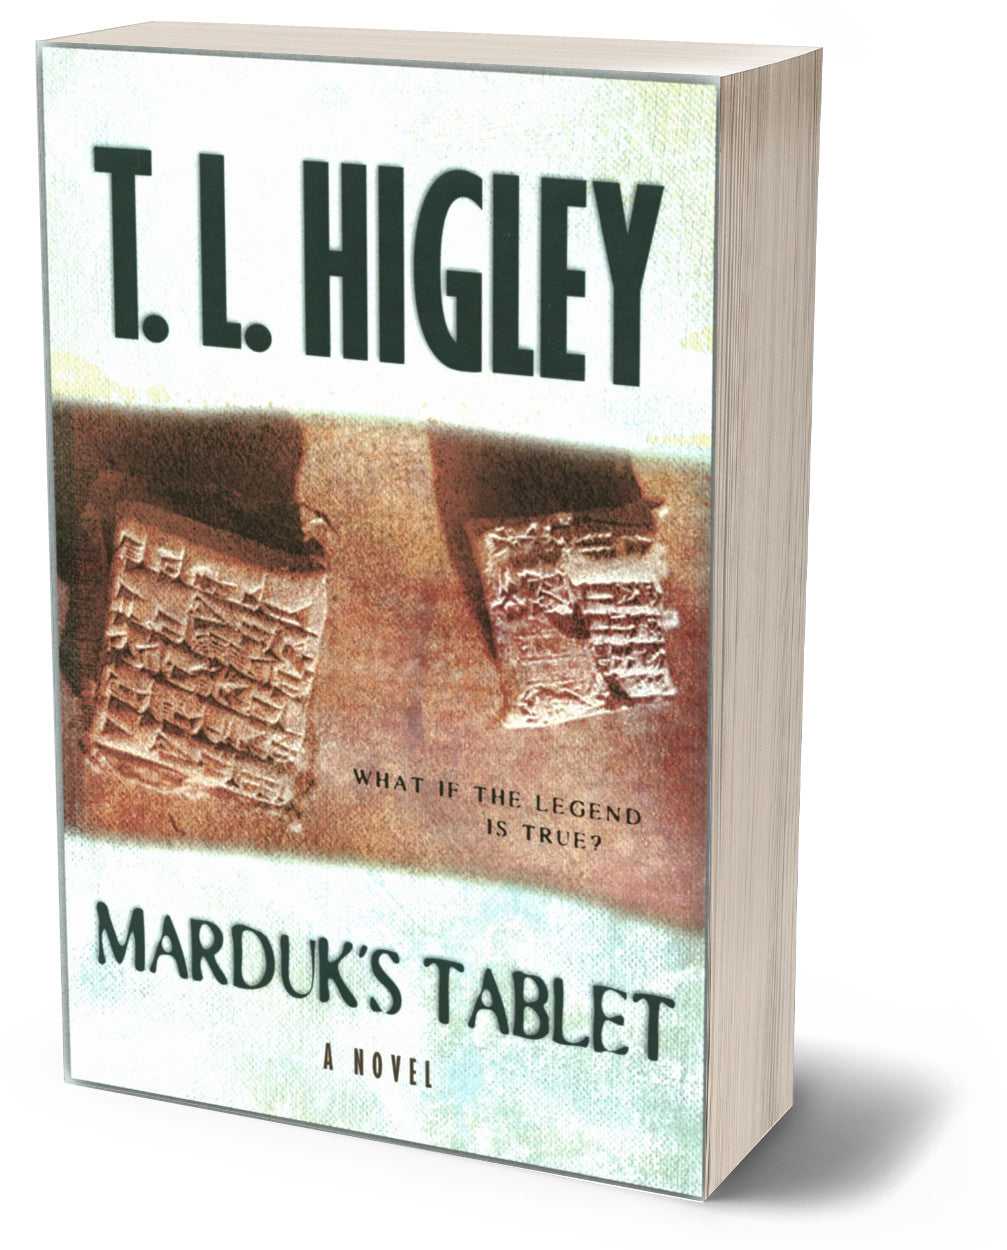 Marduk's Tablet (paperback, previous cover)